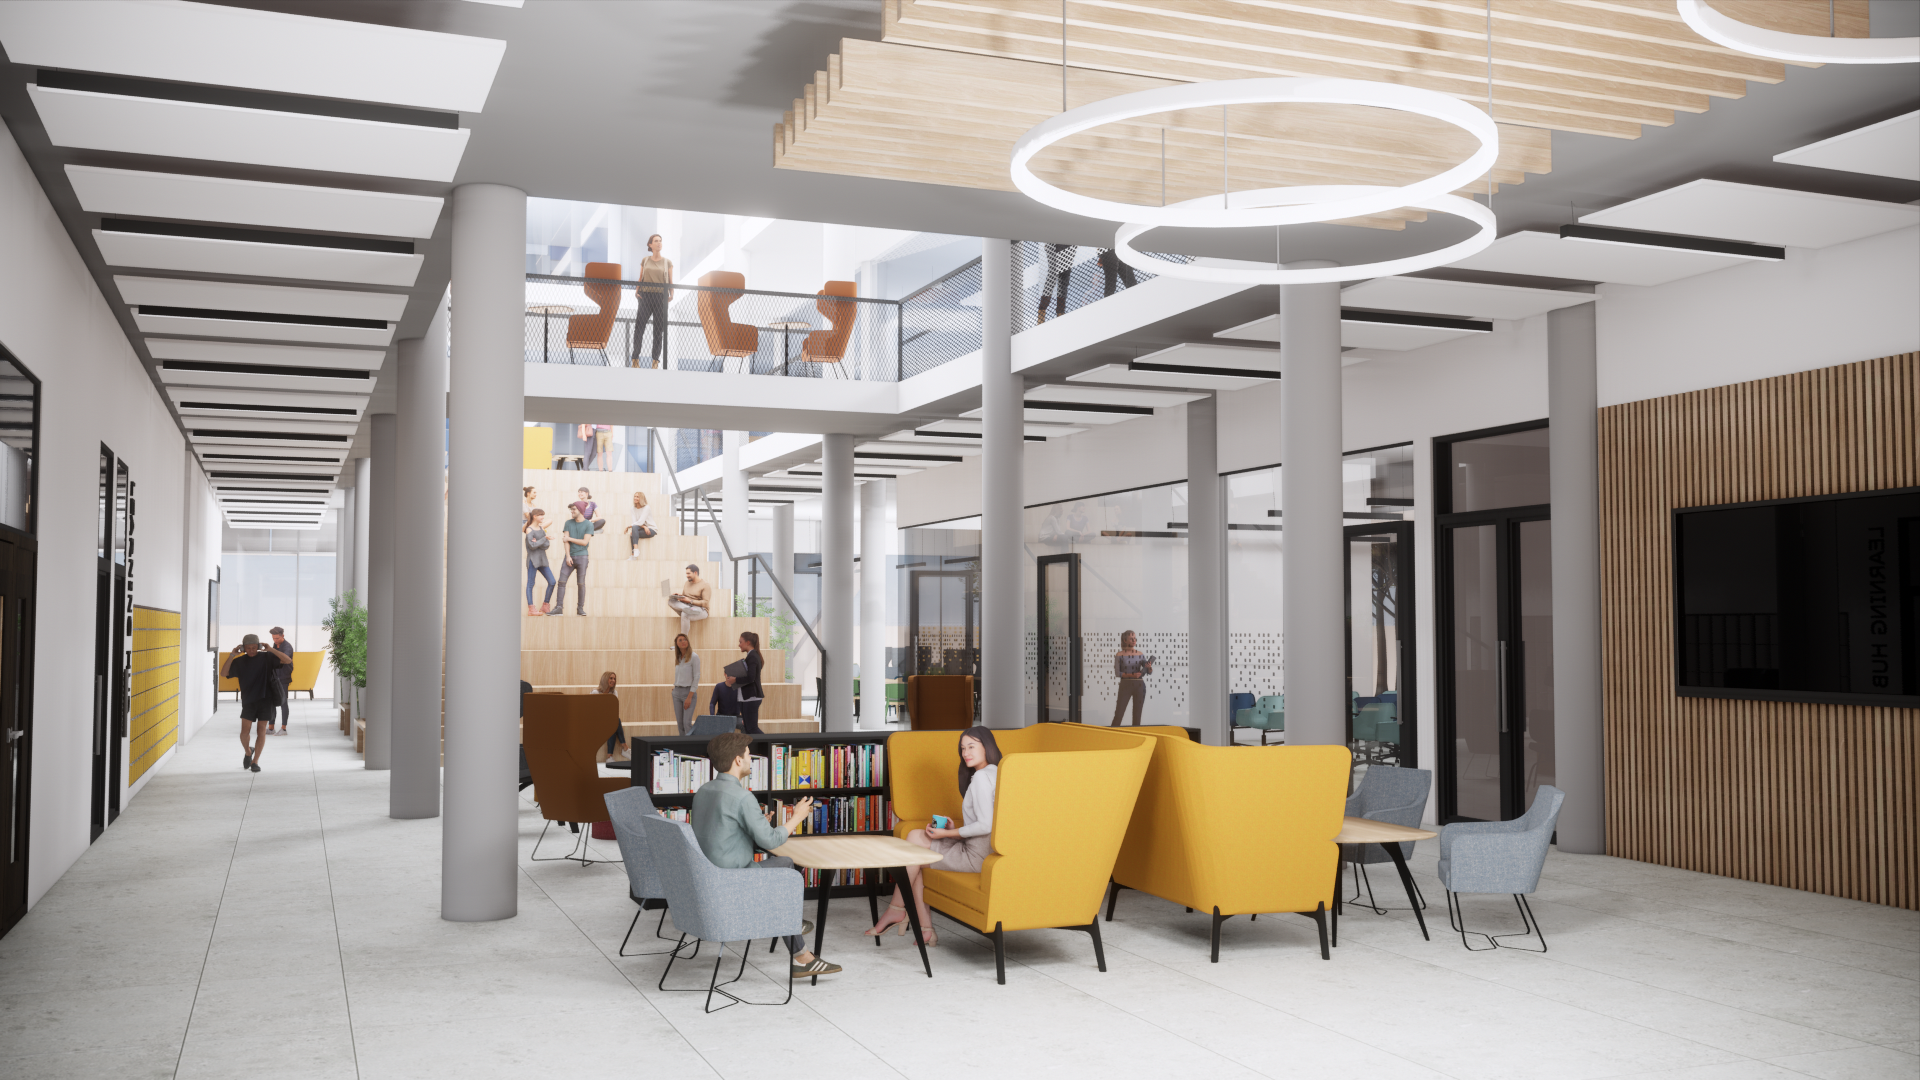 The Learning Commons: A Library, Reimagined